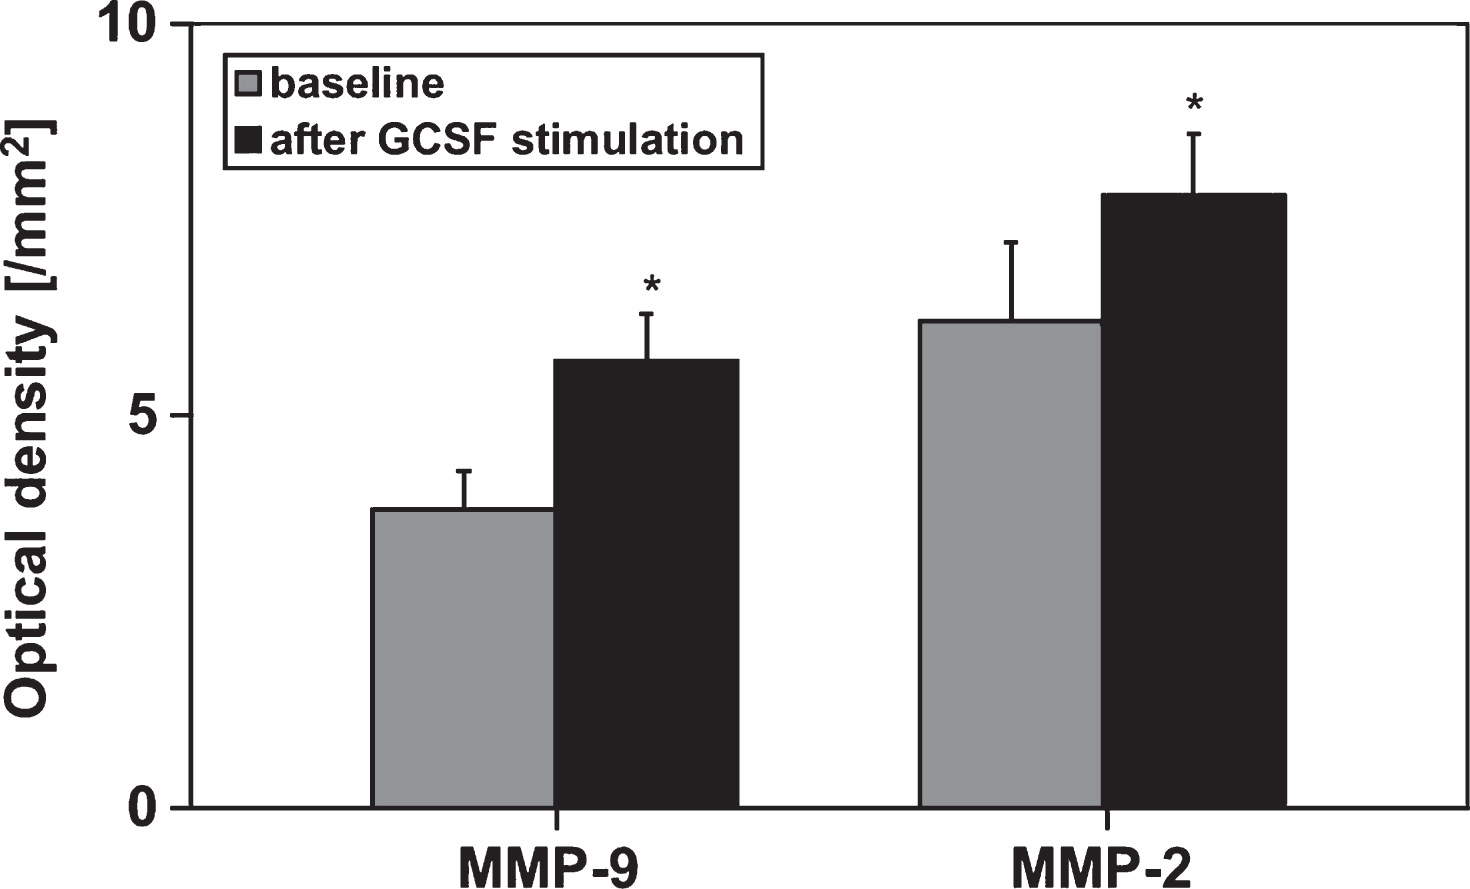 Semiquantitative analysis of MMP-2- and MMP-9-concentrations by determing the optical densities of respective zymograms using peripheral blood of allogenic stem cell donors (n = 6) before and after GM-GCSF-stimulation (5d, 10 μg/kg BW). Data are given as mean±SEM, *p < 0,05 compared to baseline, Mann-Whitney-Test.